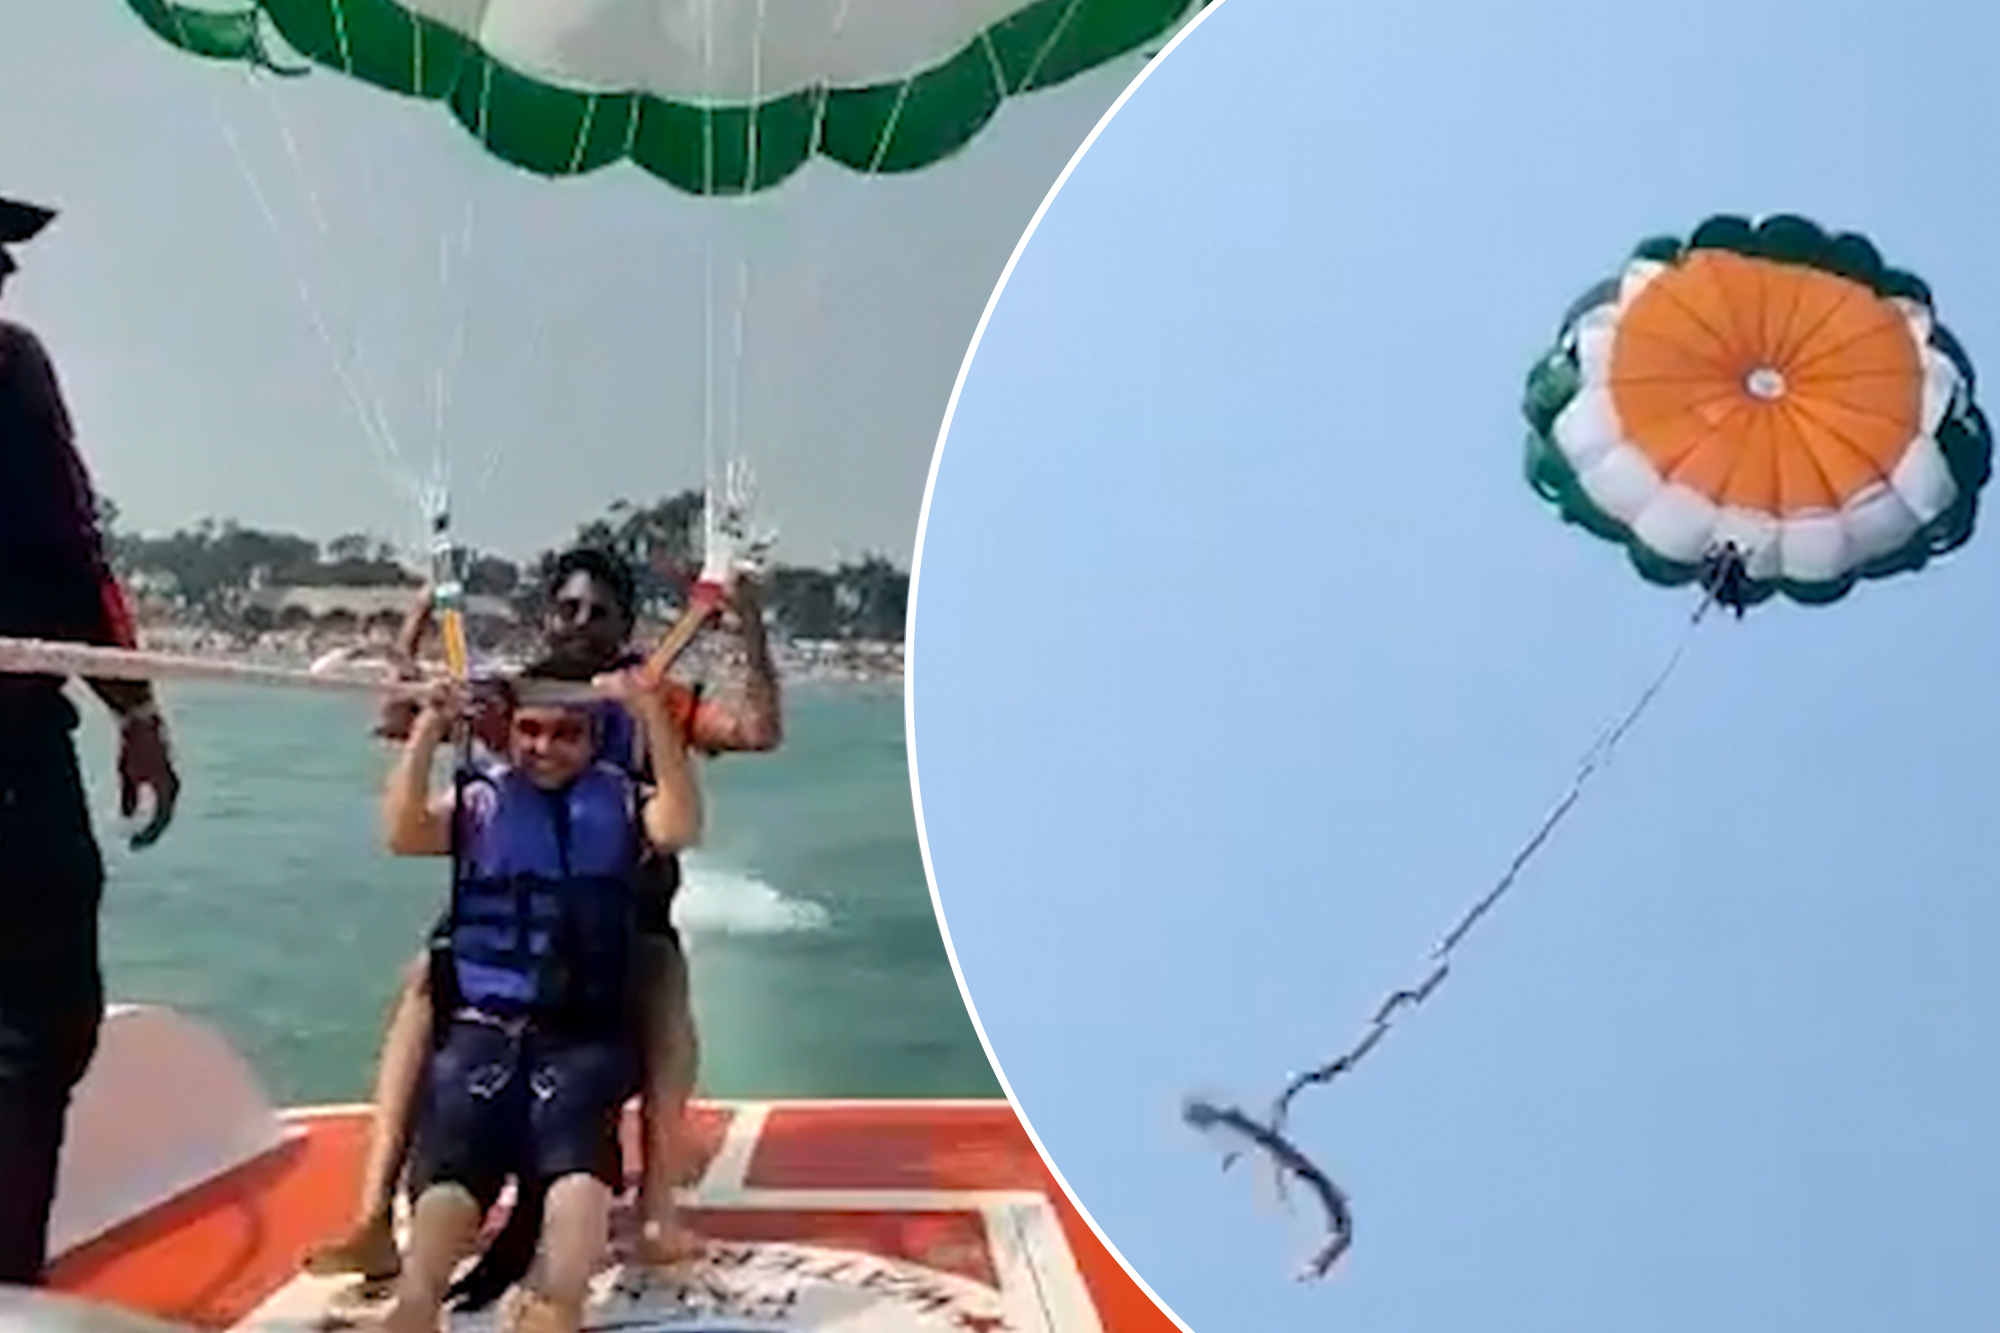 Parasailing fail! Couple sent flying after rope snaps